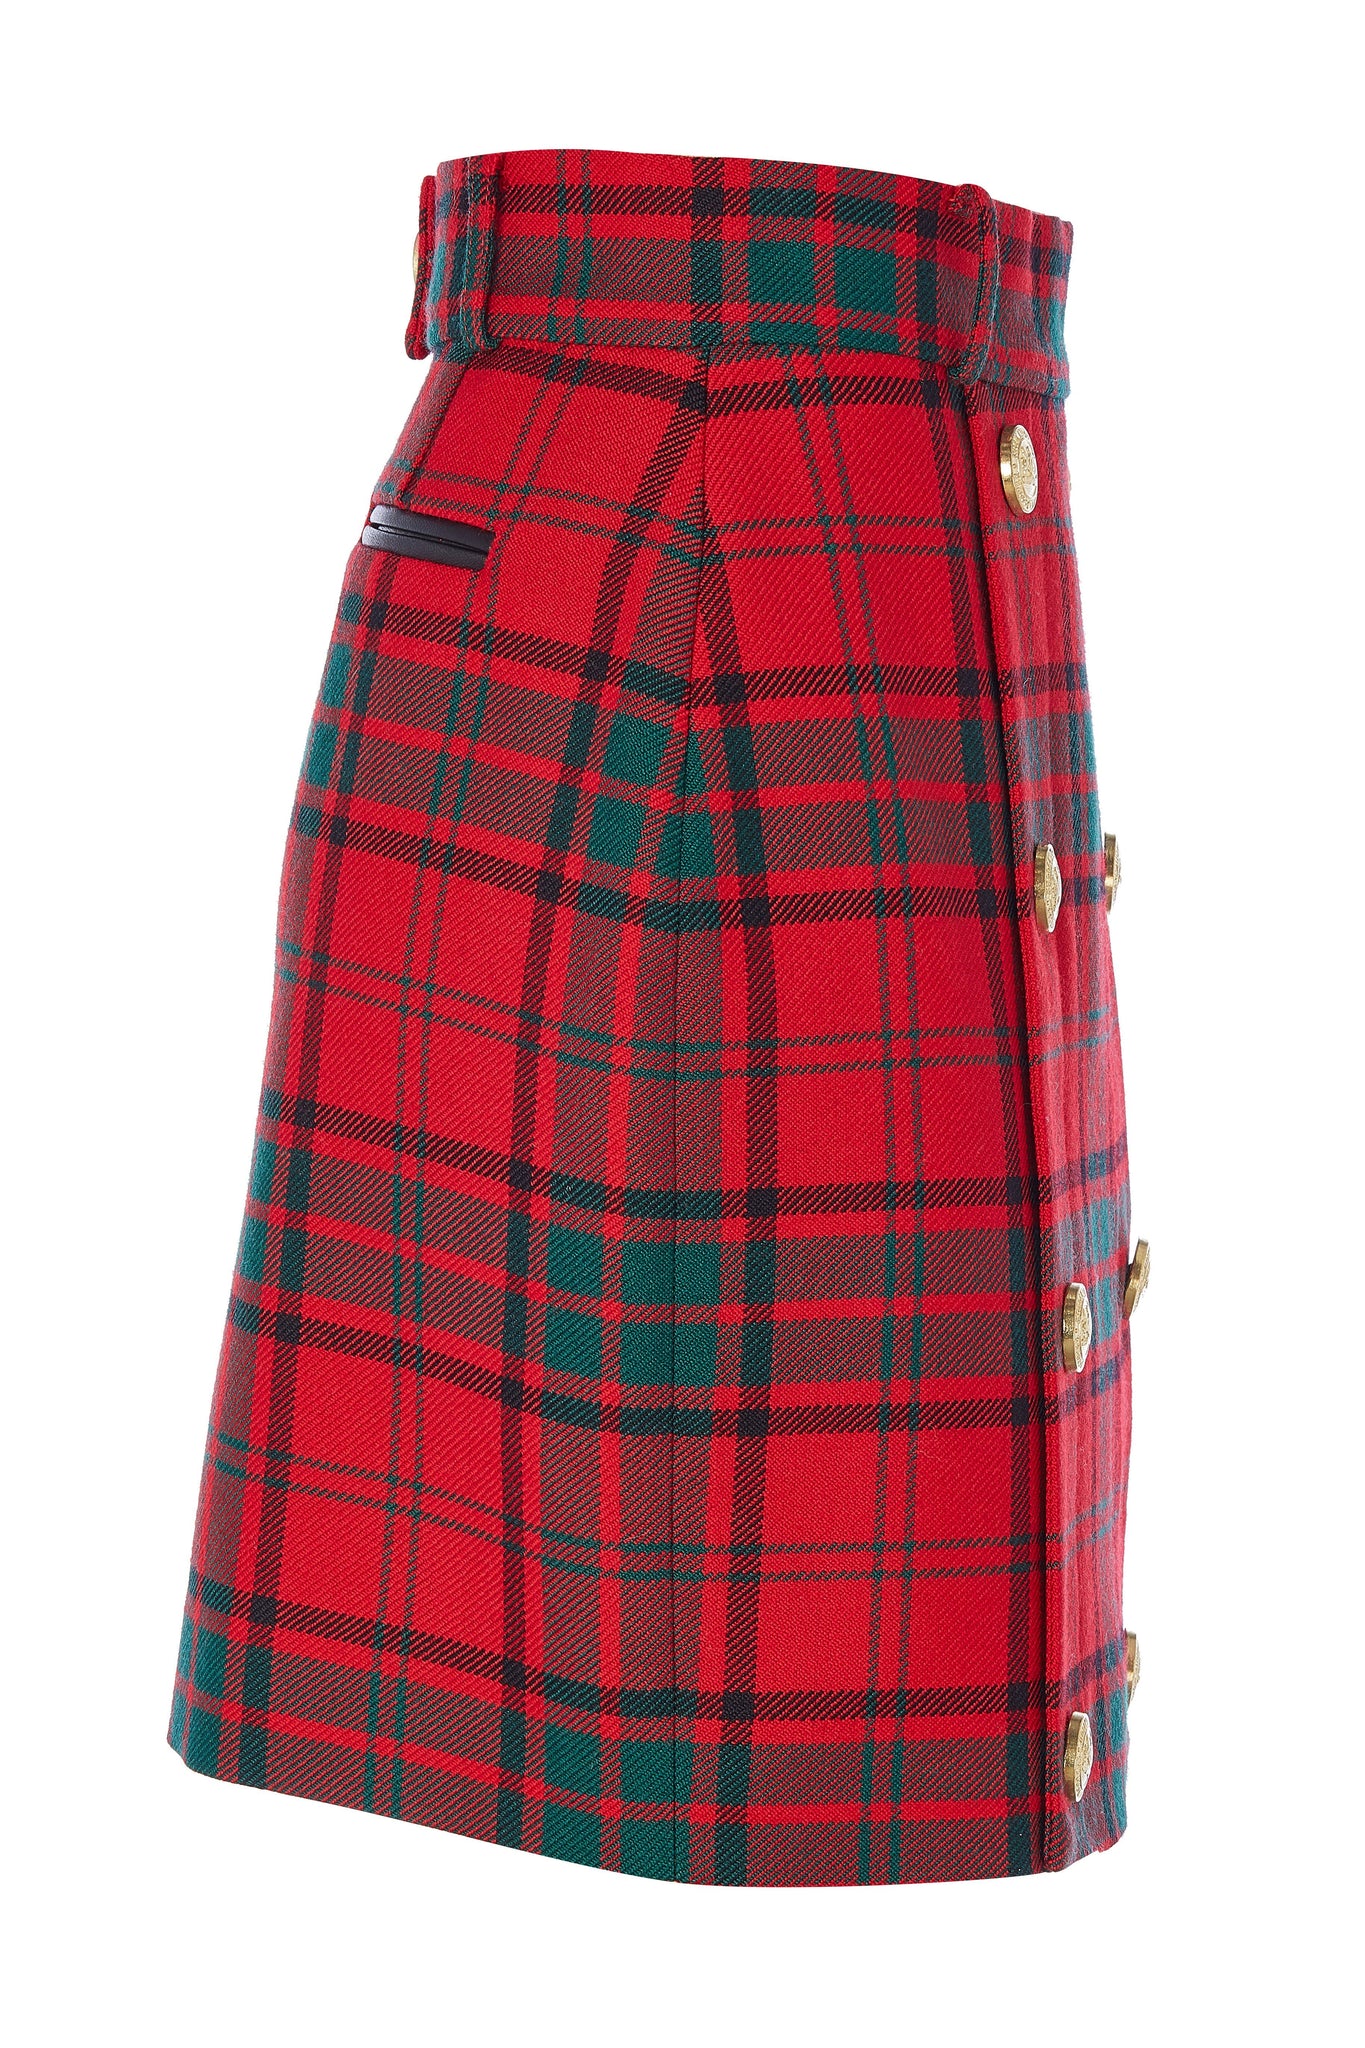 side of womens wool pencil mini skirt in red and green tartan check with concealed zip fastening on centre back and gold rivets down front